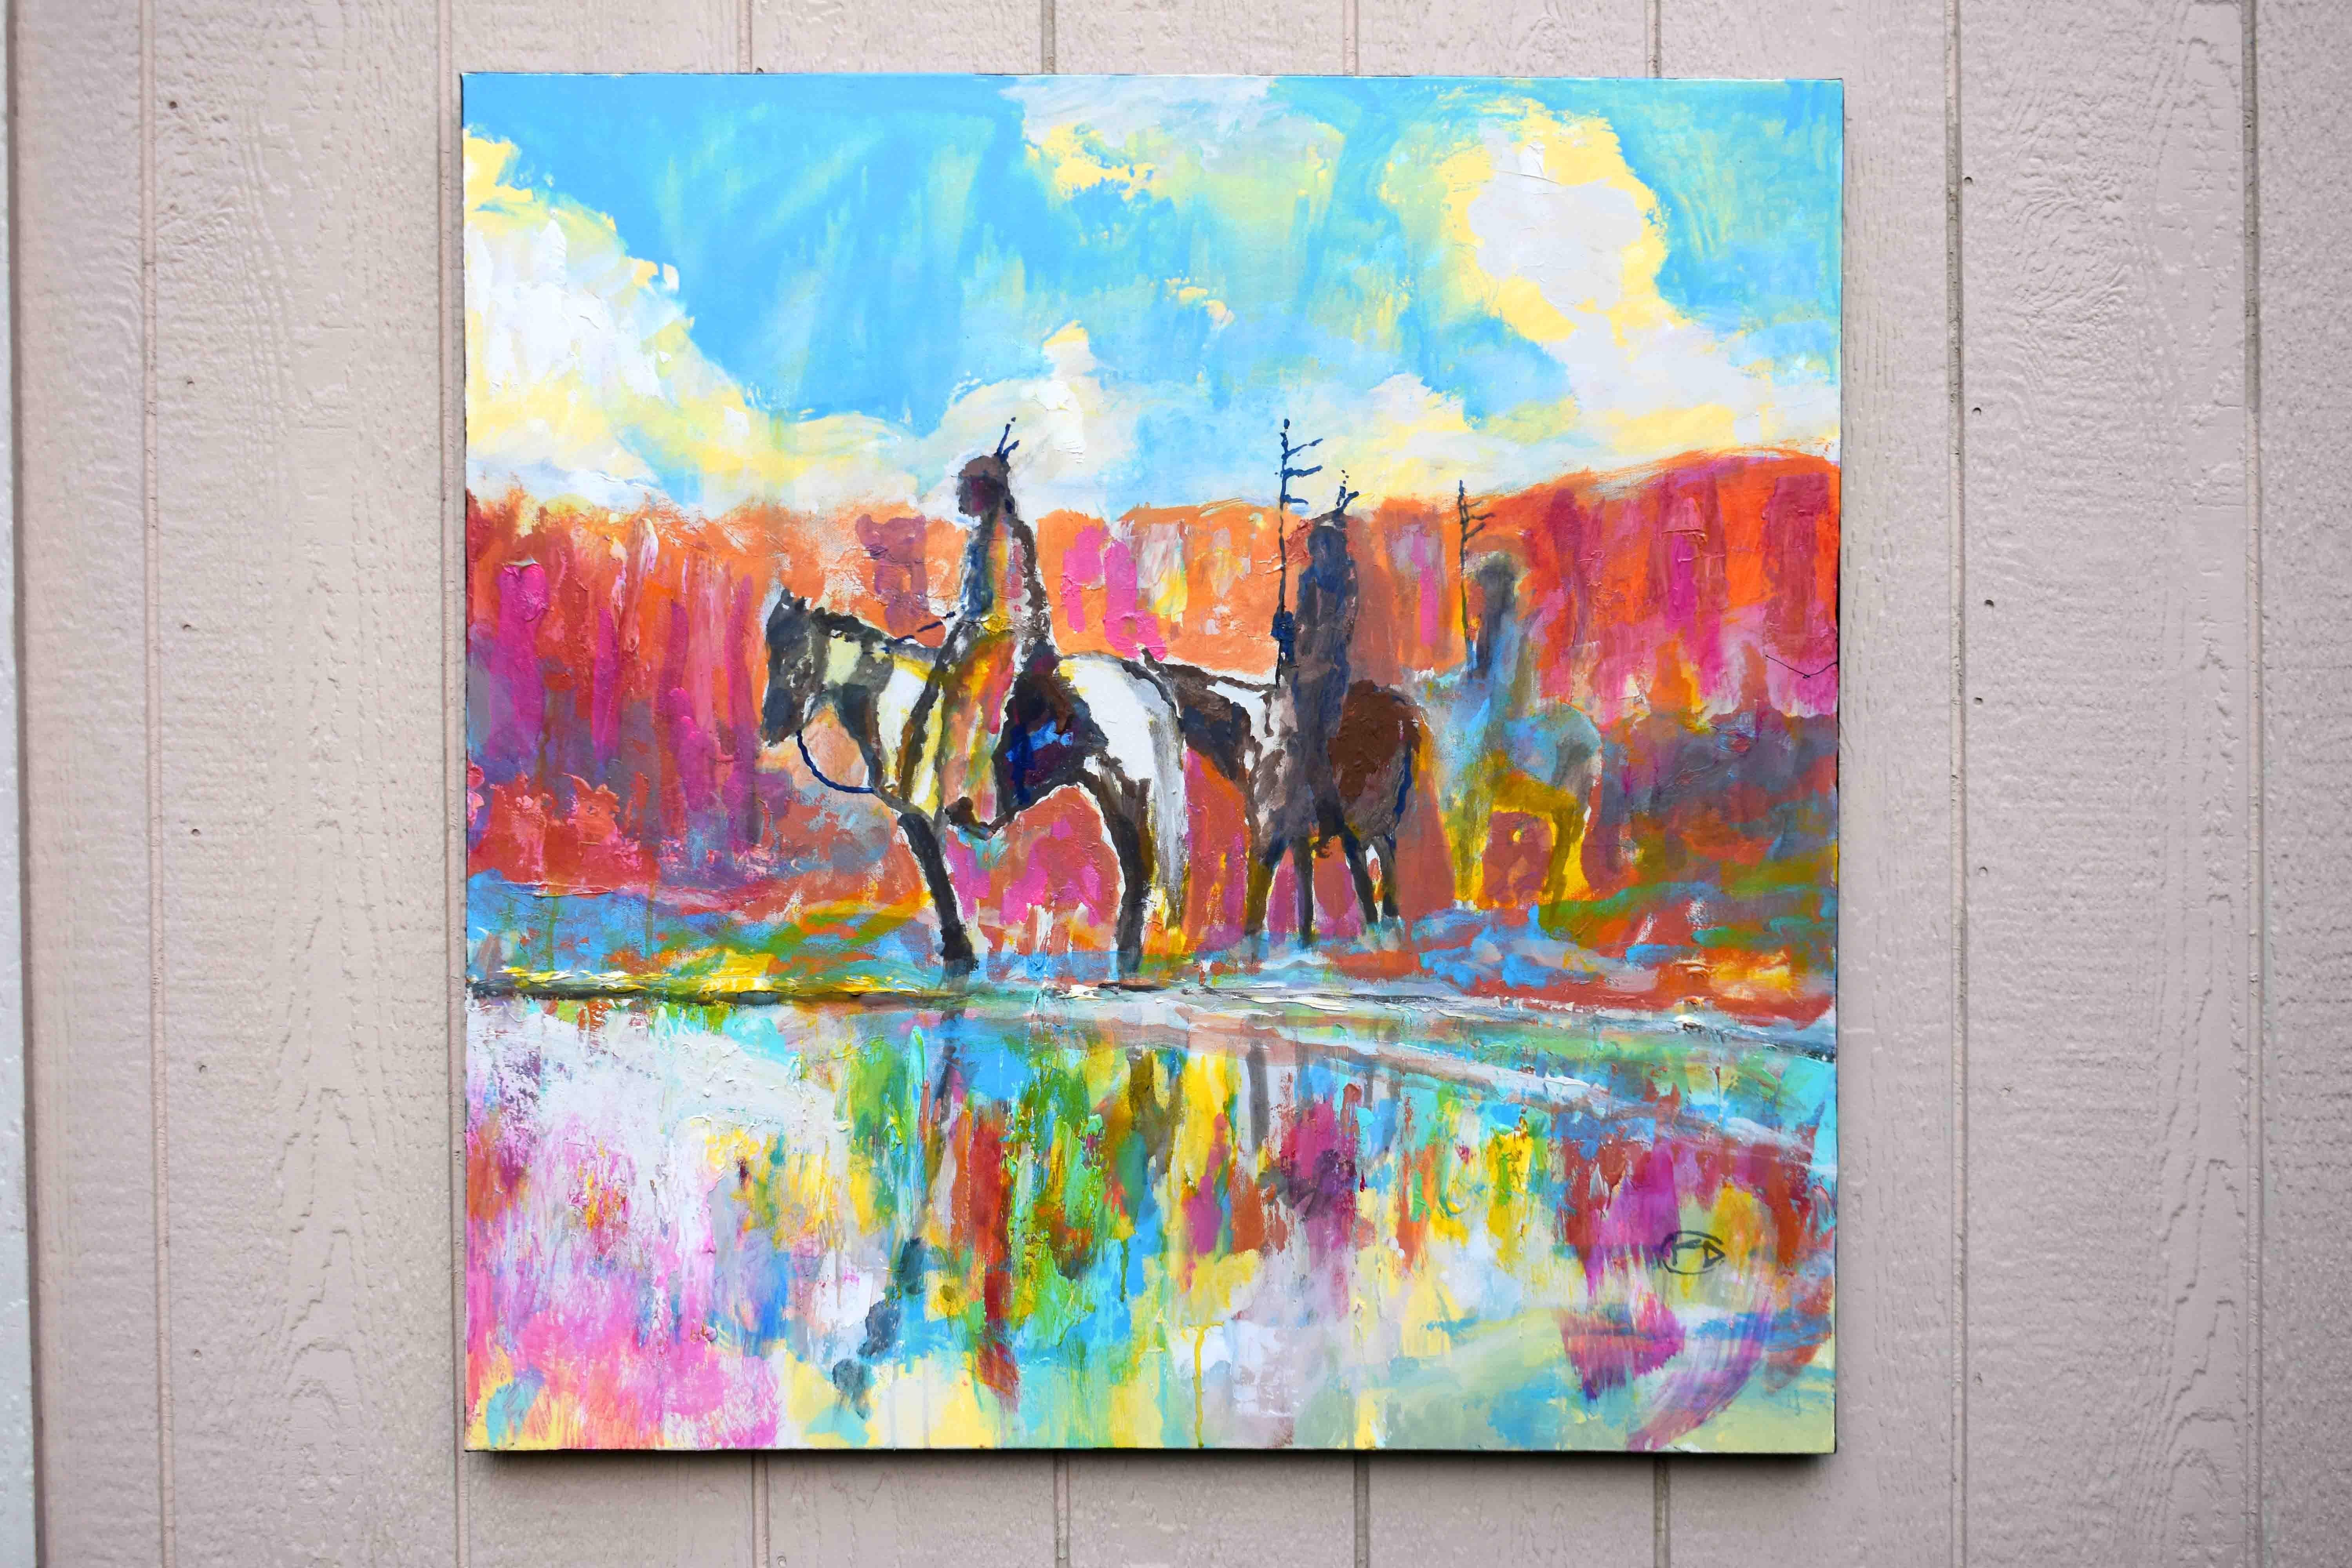 <p>Artist Comments<br>Artist Kip Decker portrays a poignant scene of Native Americans on horseback. The group explores a shallow water source after a recent rain. The iridescent hues of the painting mirror their rousing journey and showcase the